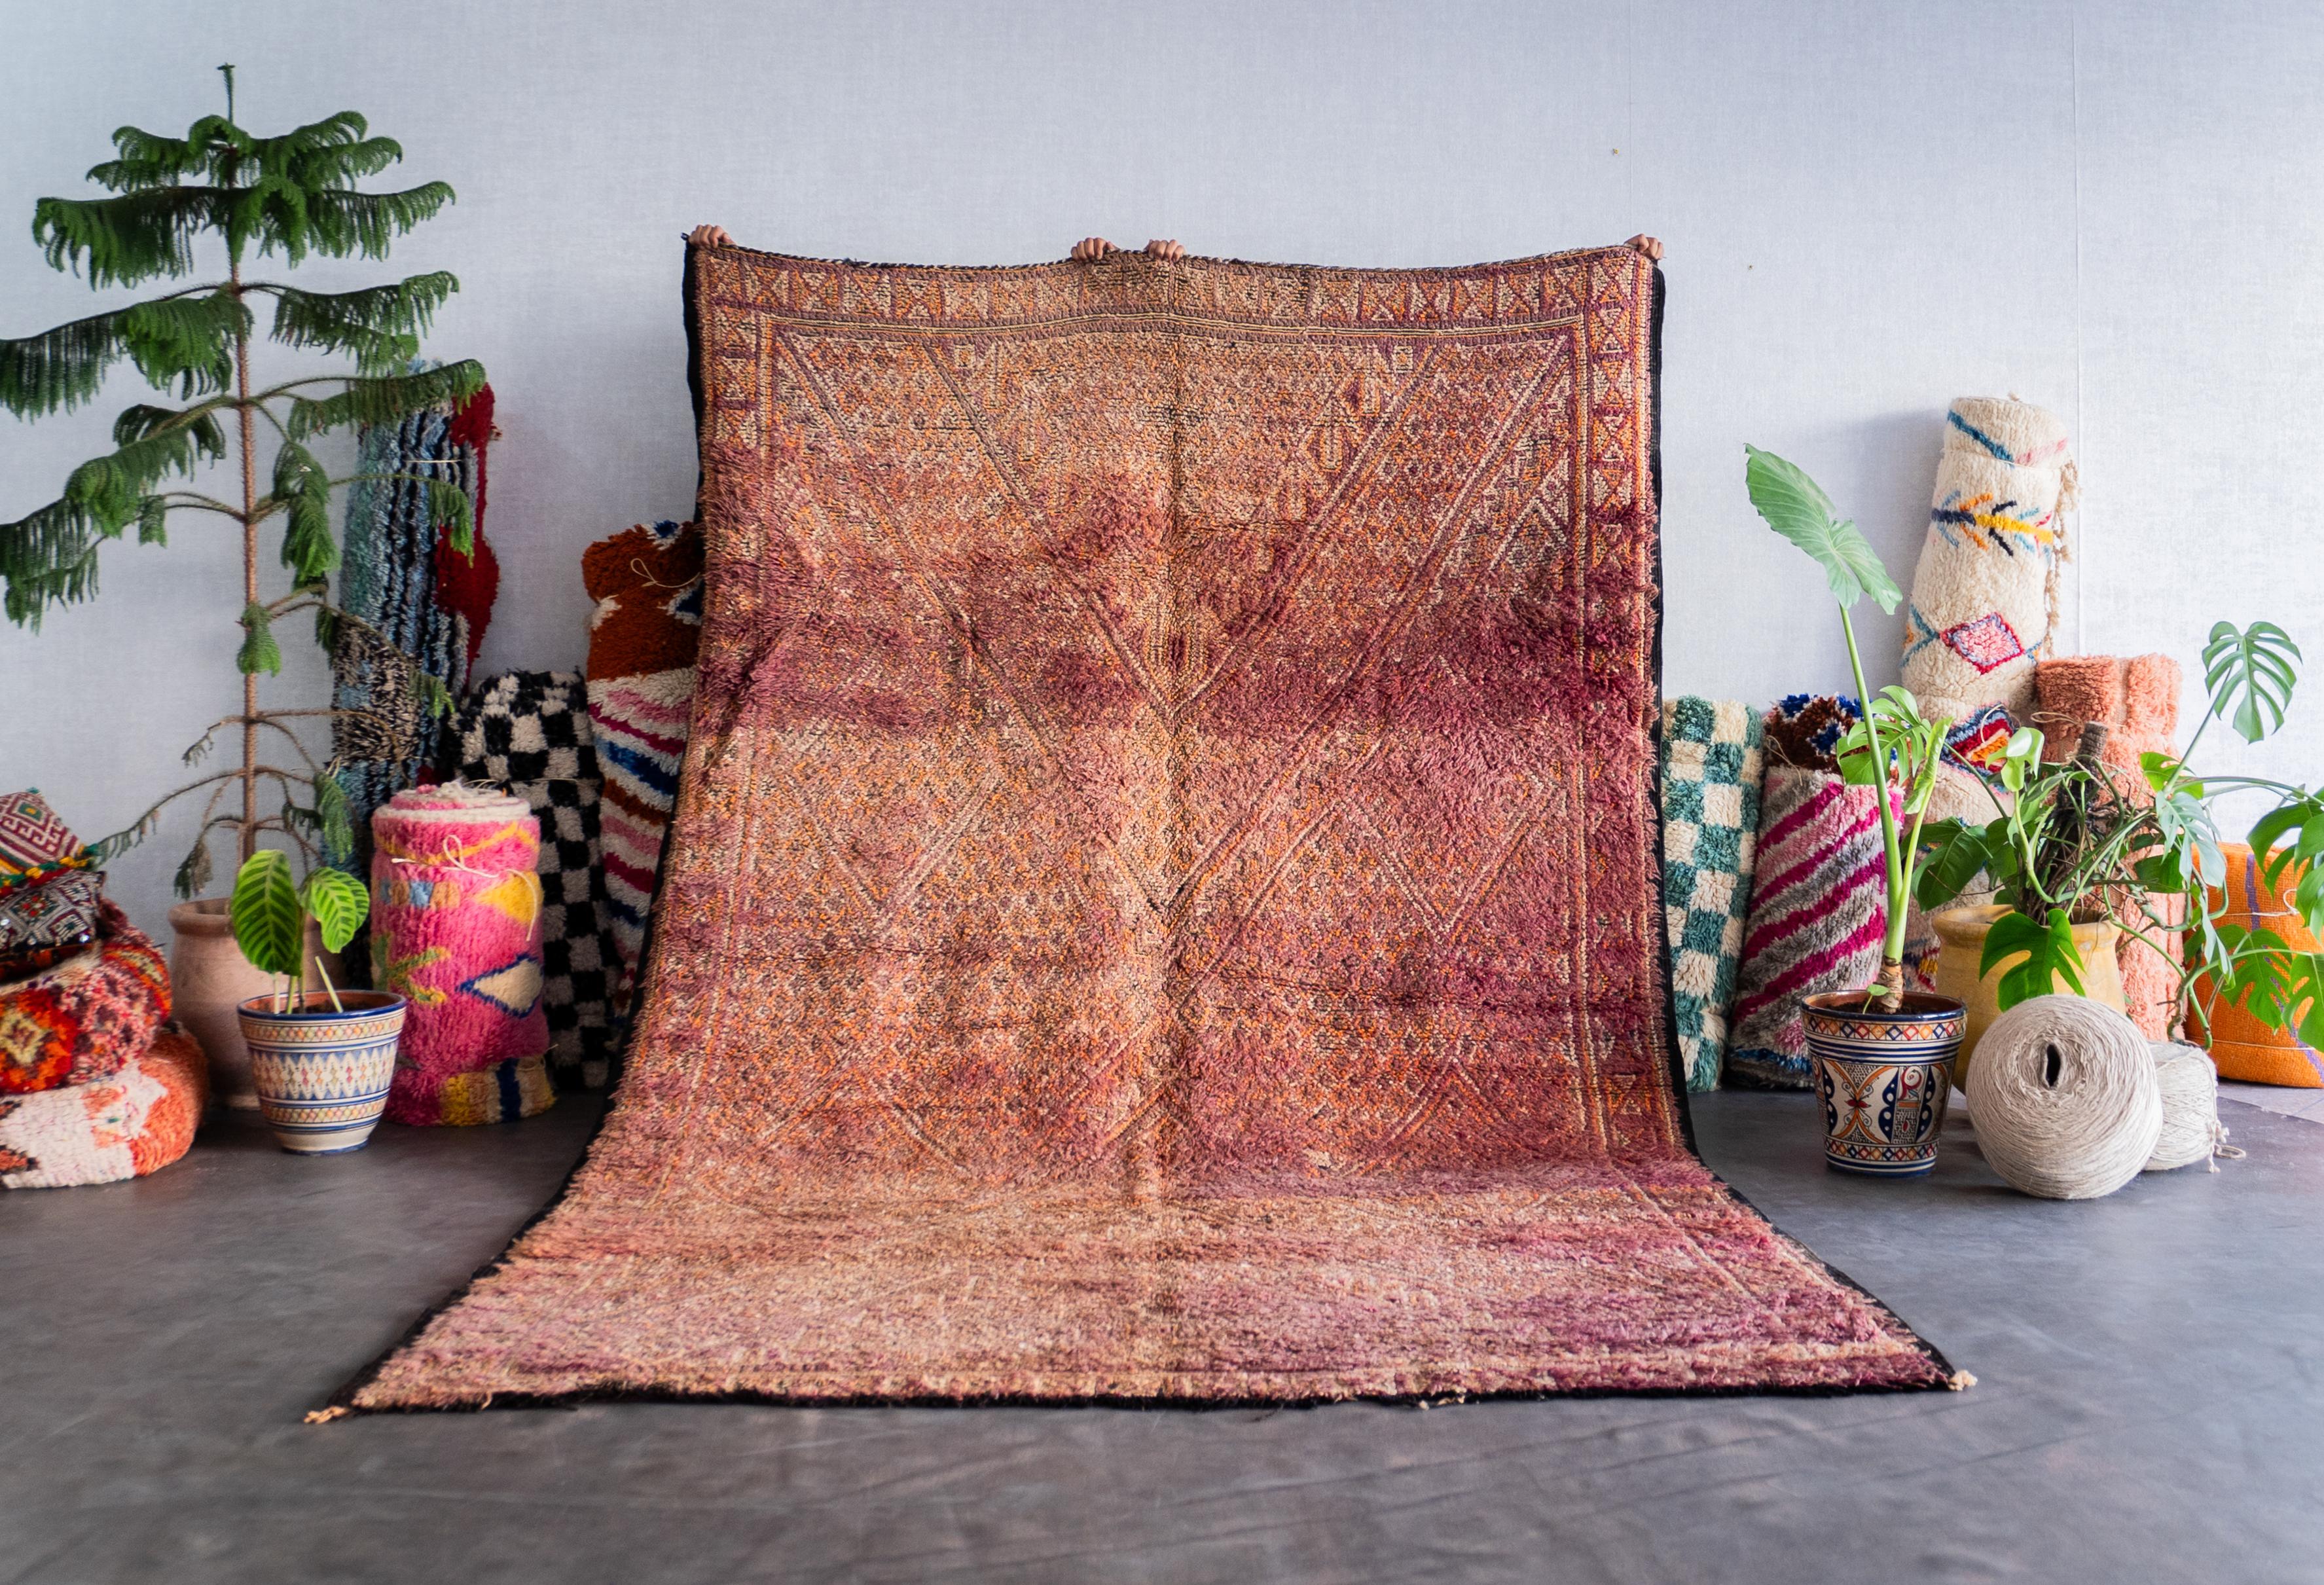 Uncover the rich heritage woven into our purple Moroccan vintage rug. Handmade by skilled artisans using time-tested techniques, each Berber rug is a unique narrative, echoing the cultural tapestry of Morocco. With intricate geometric patterns and a